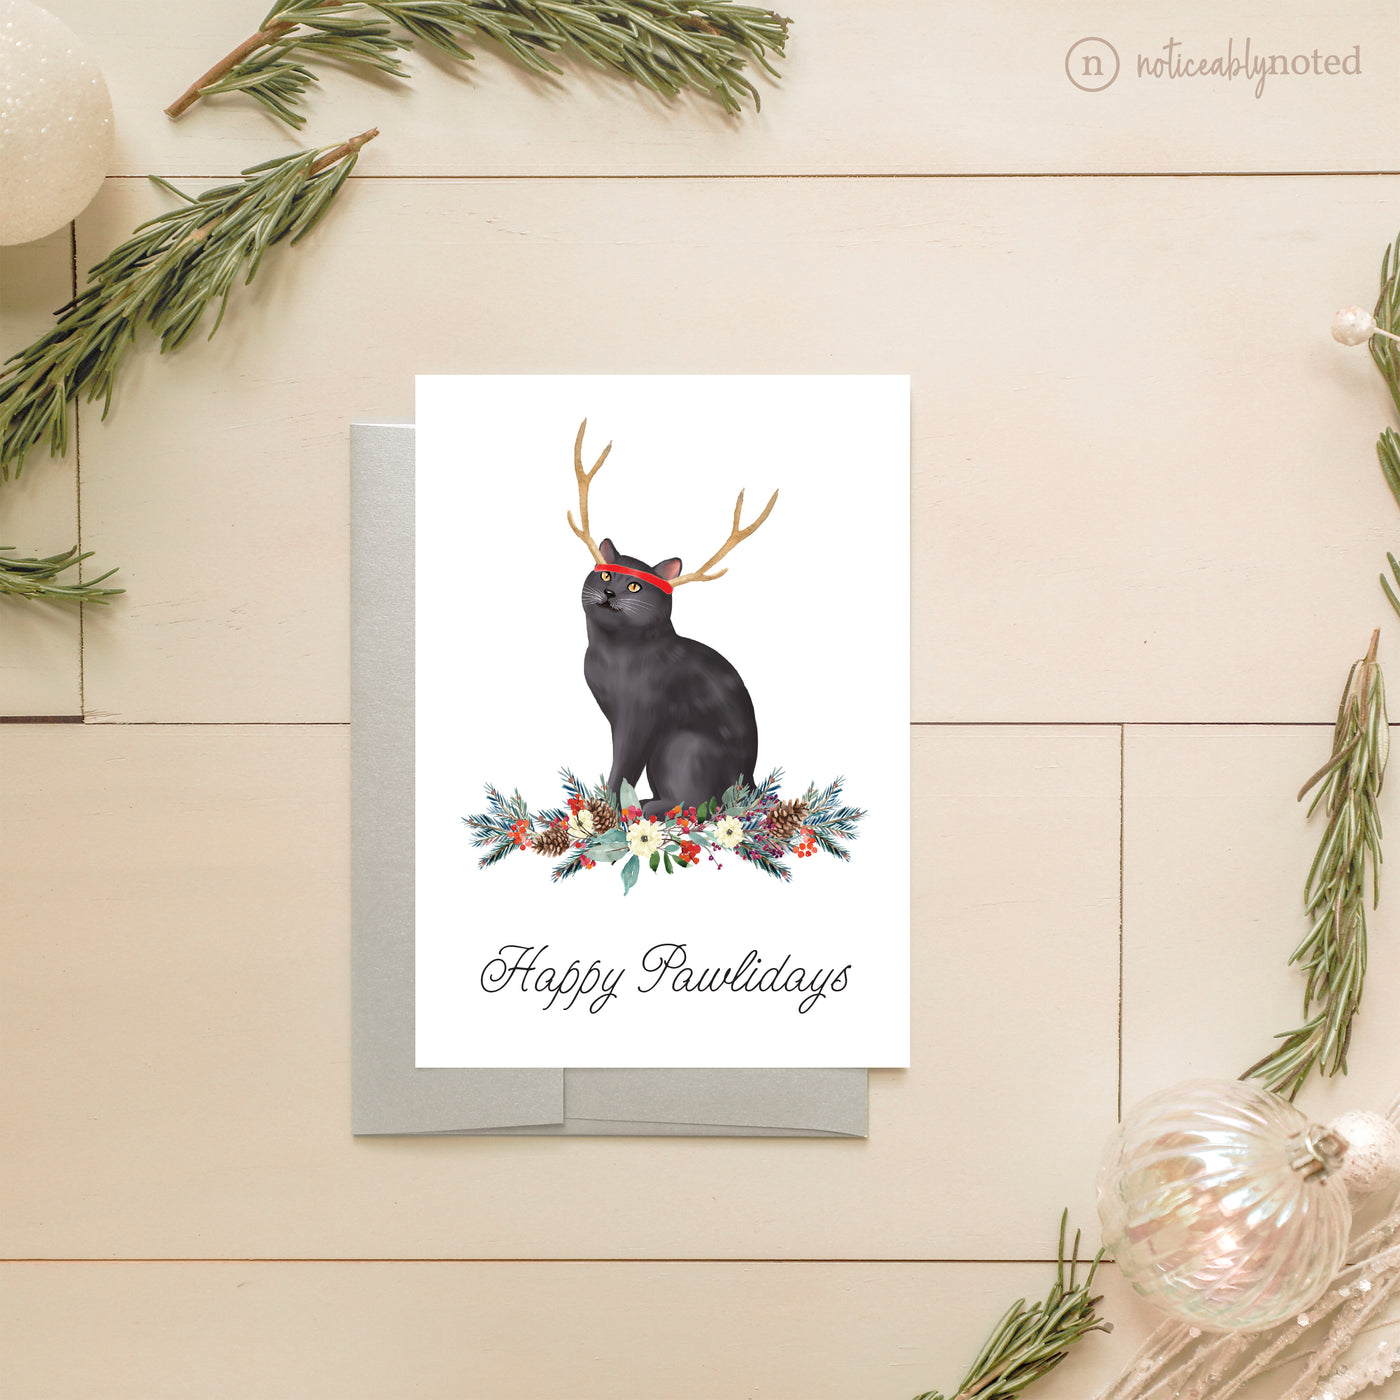 Chartreux Holiday Card | Noticeably Noted